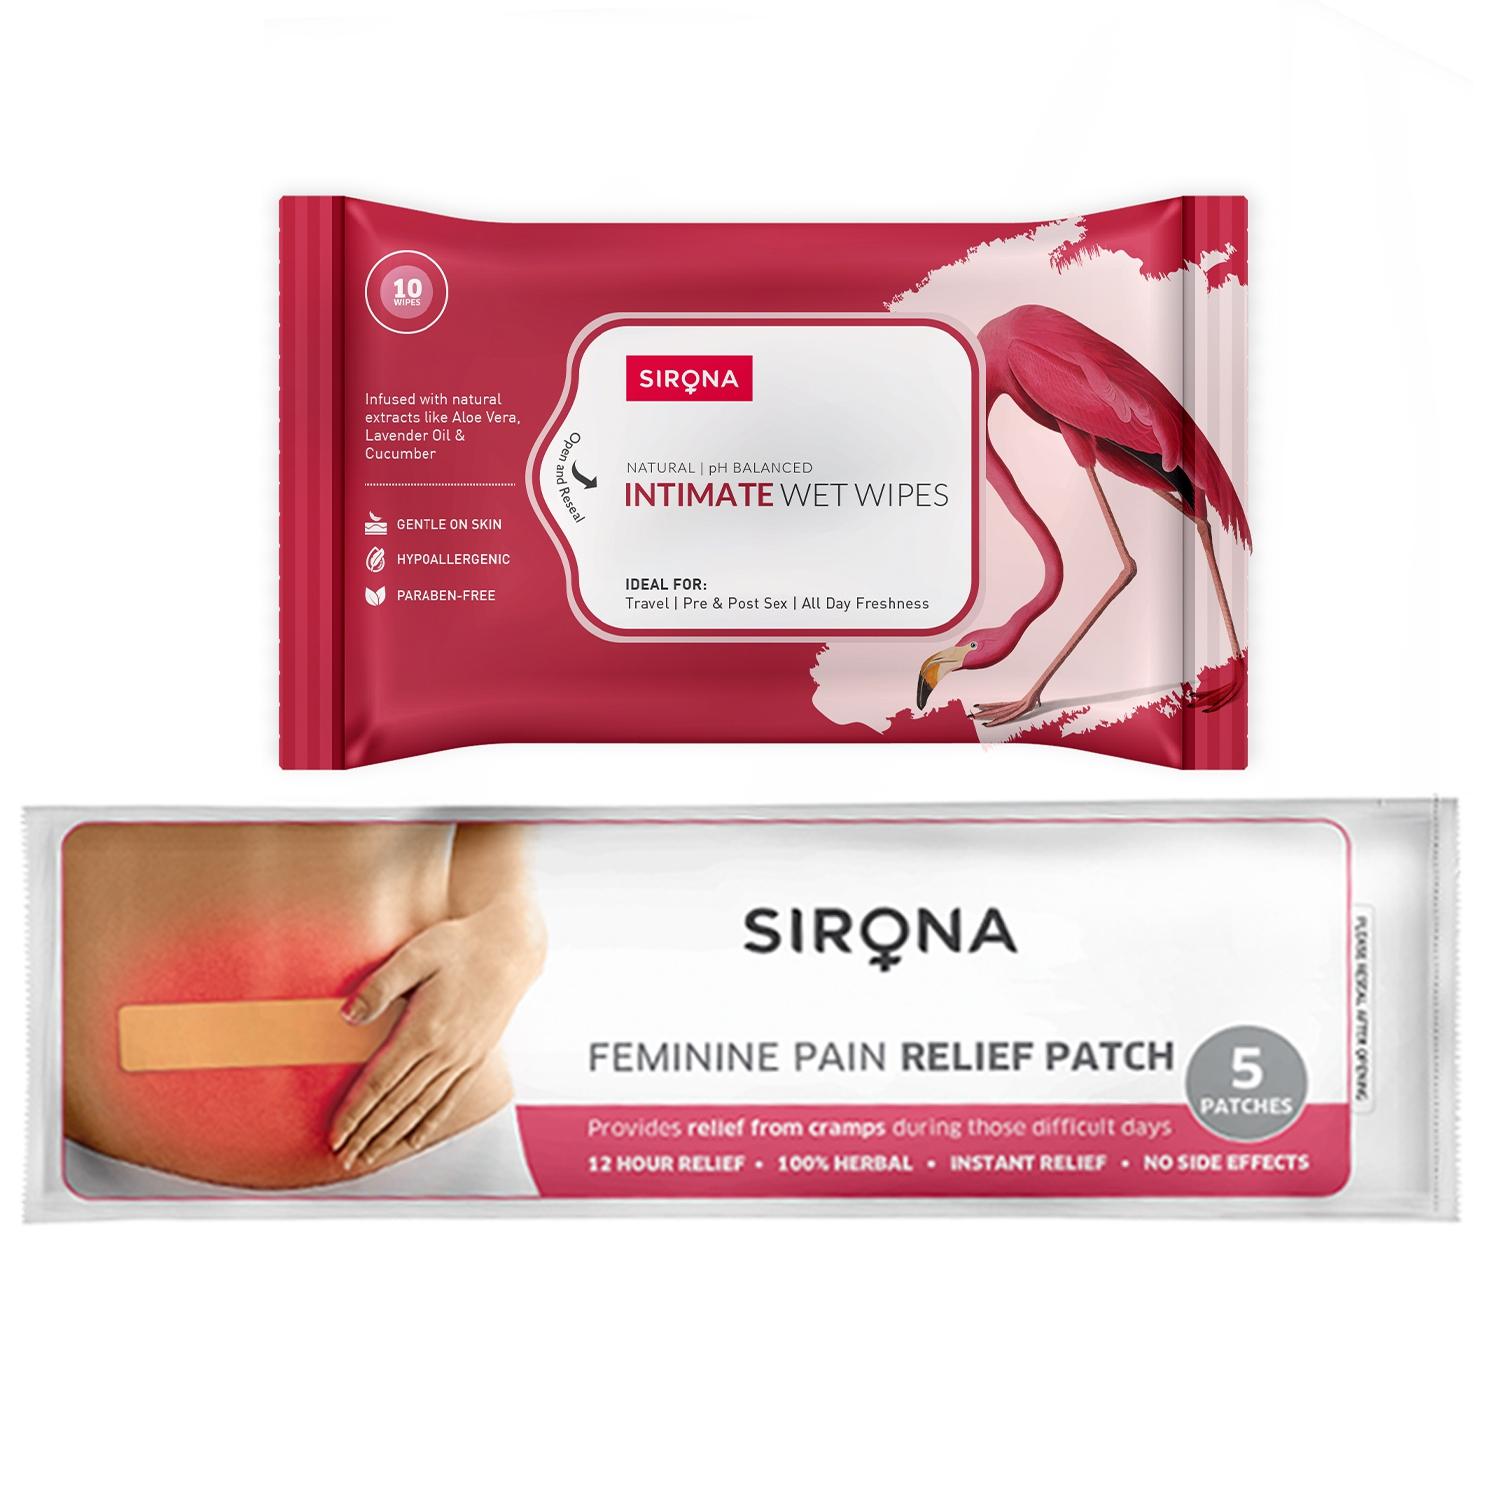 Sirona Feminine Pain Relief Patches for Period Pain - 5 Patches with Intimate Wipes 10 Wipes Combo